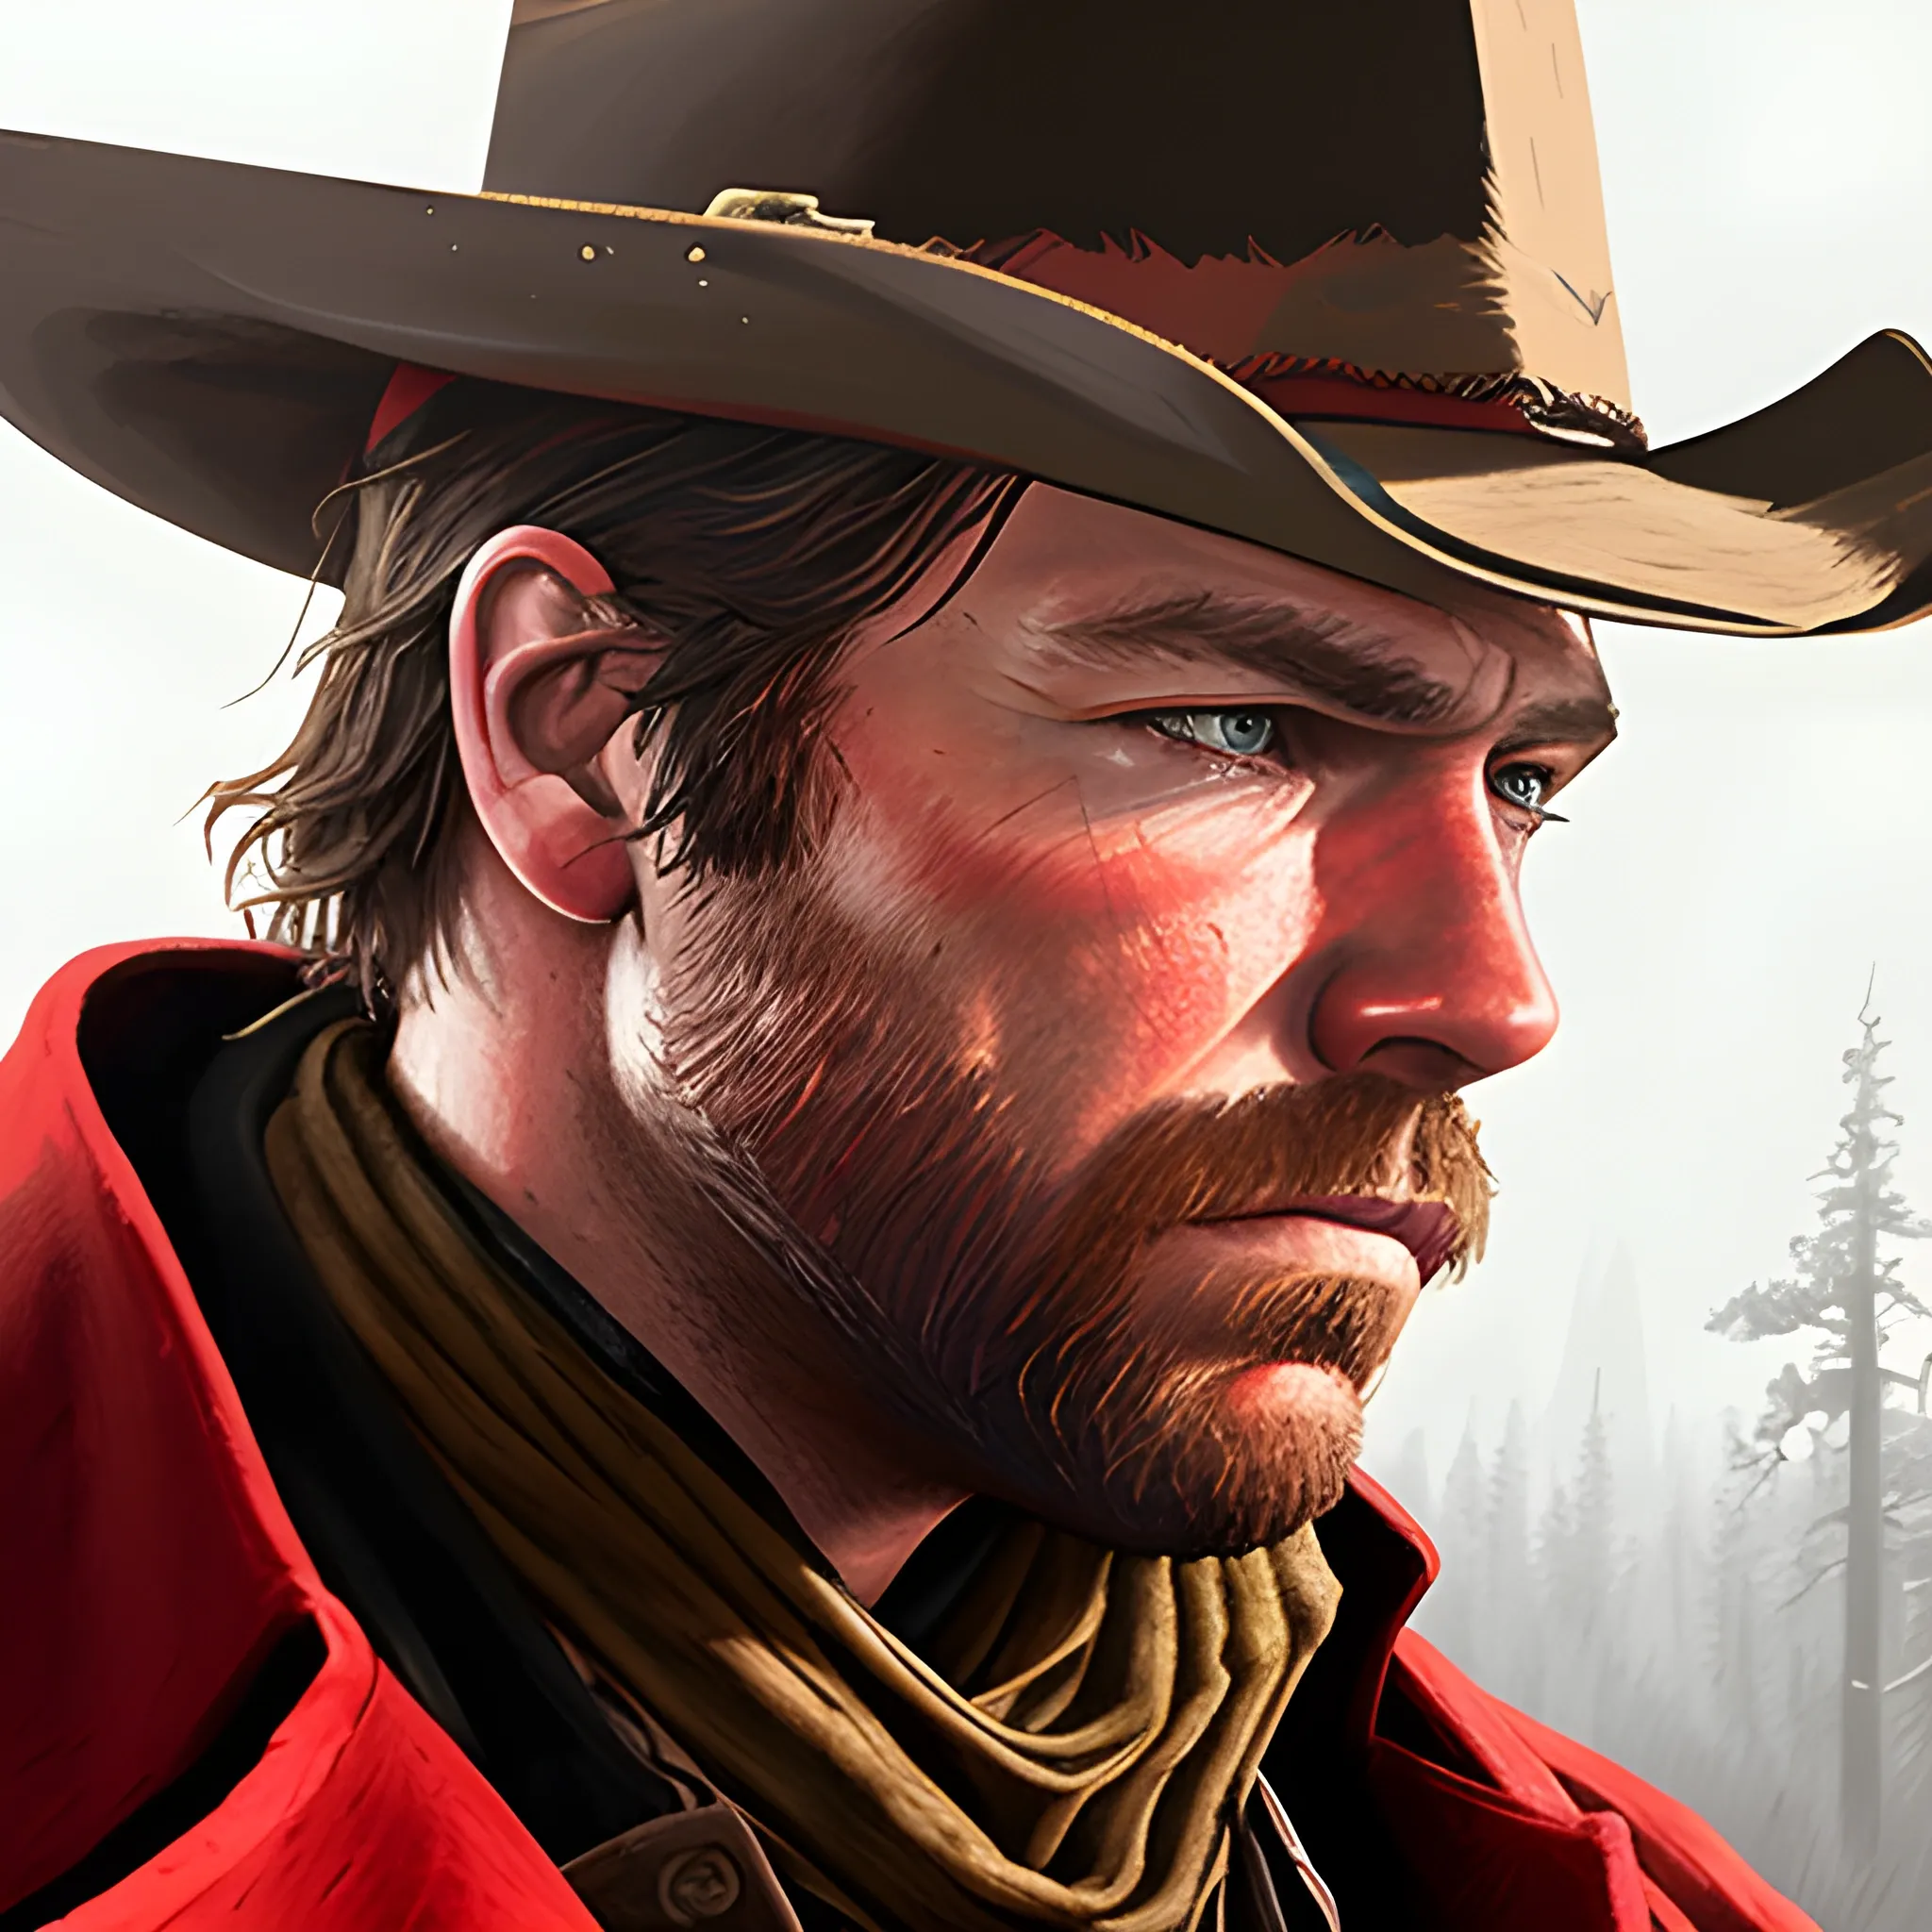 arthur morgan fromred dead redemption, Stable Diffusion